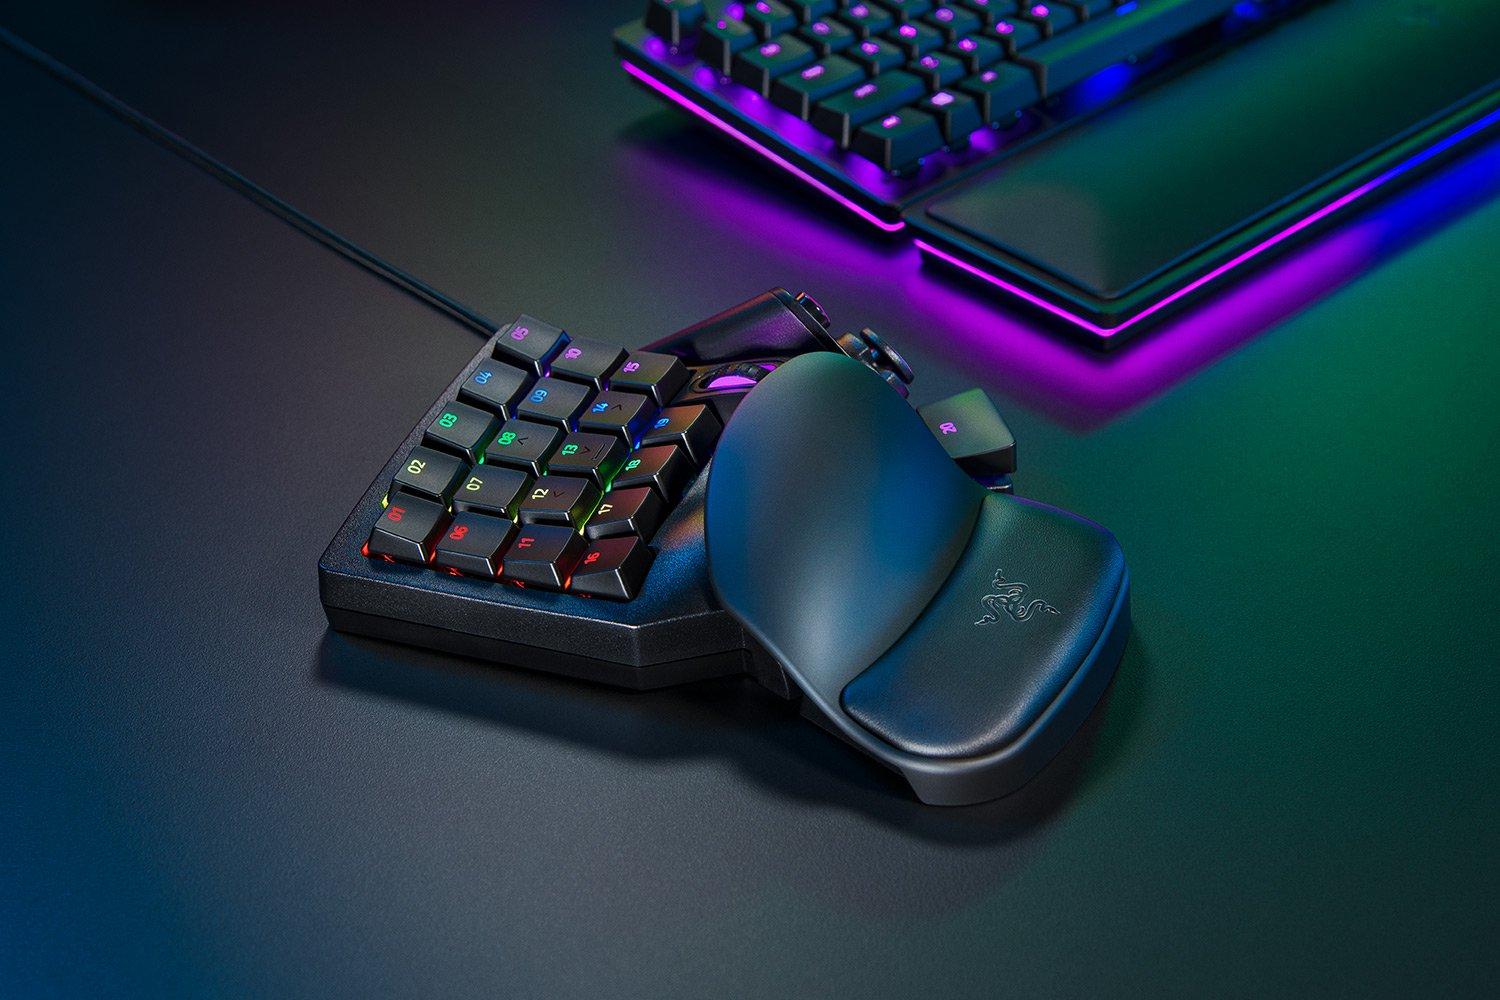 Connecting a gaming keyboard to a laptop provides better customization options for serious gamers.